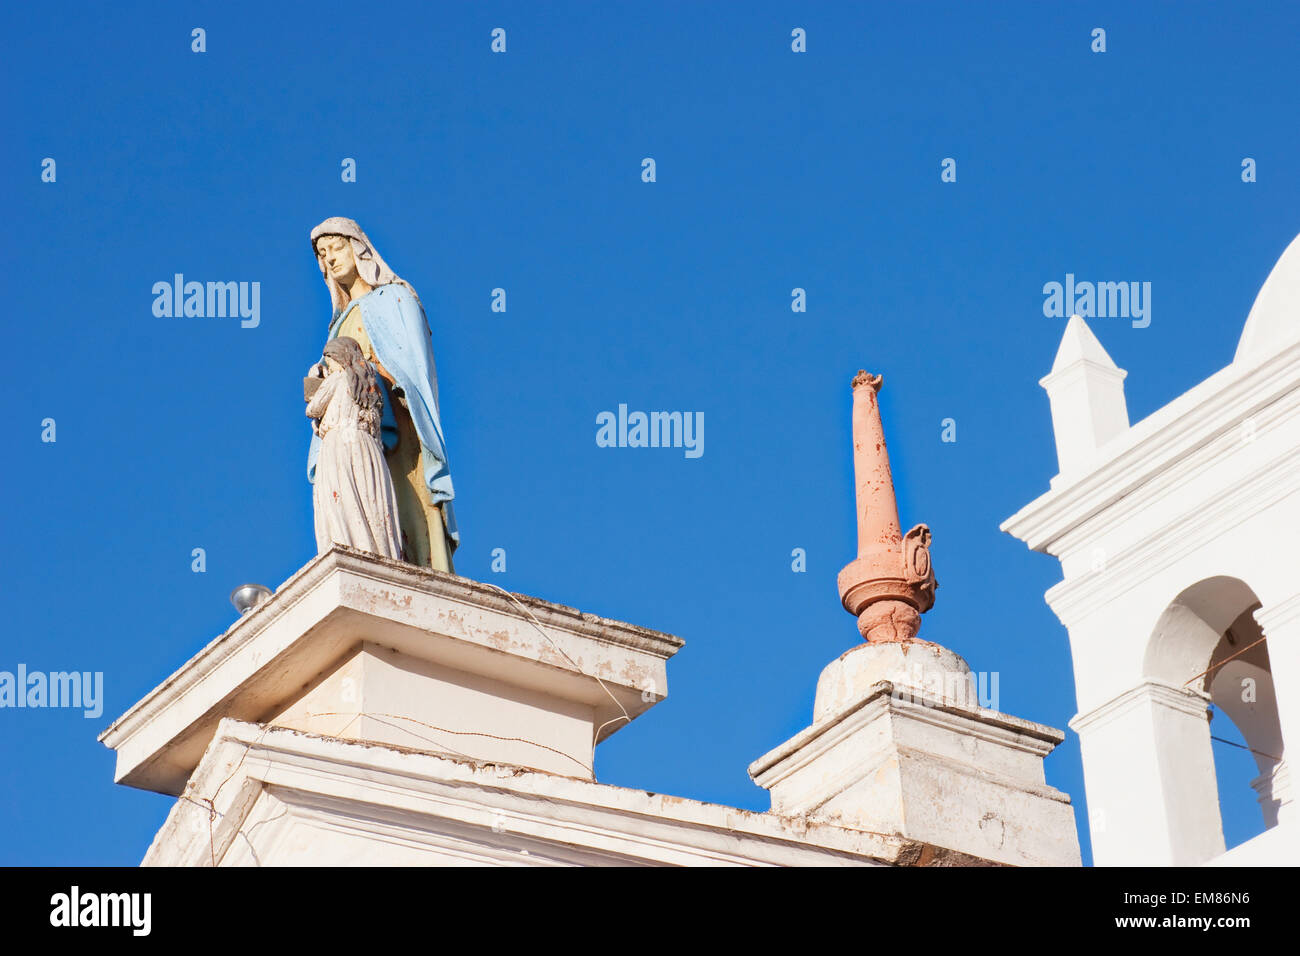 Statue of the Virgin Mary on the Metropolitan Cathedral, Sucre, Chuquisaca Department, Bolivia Stock Photo